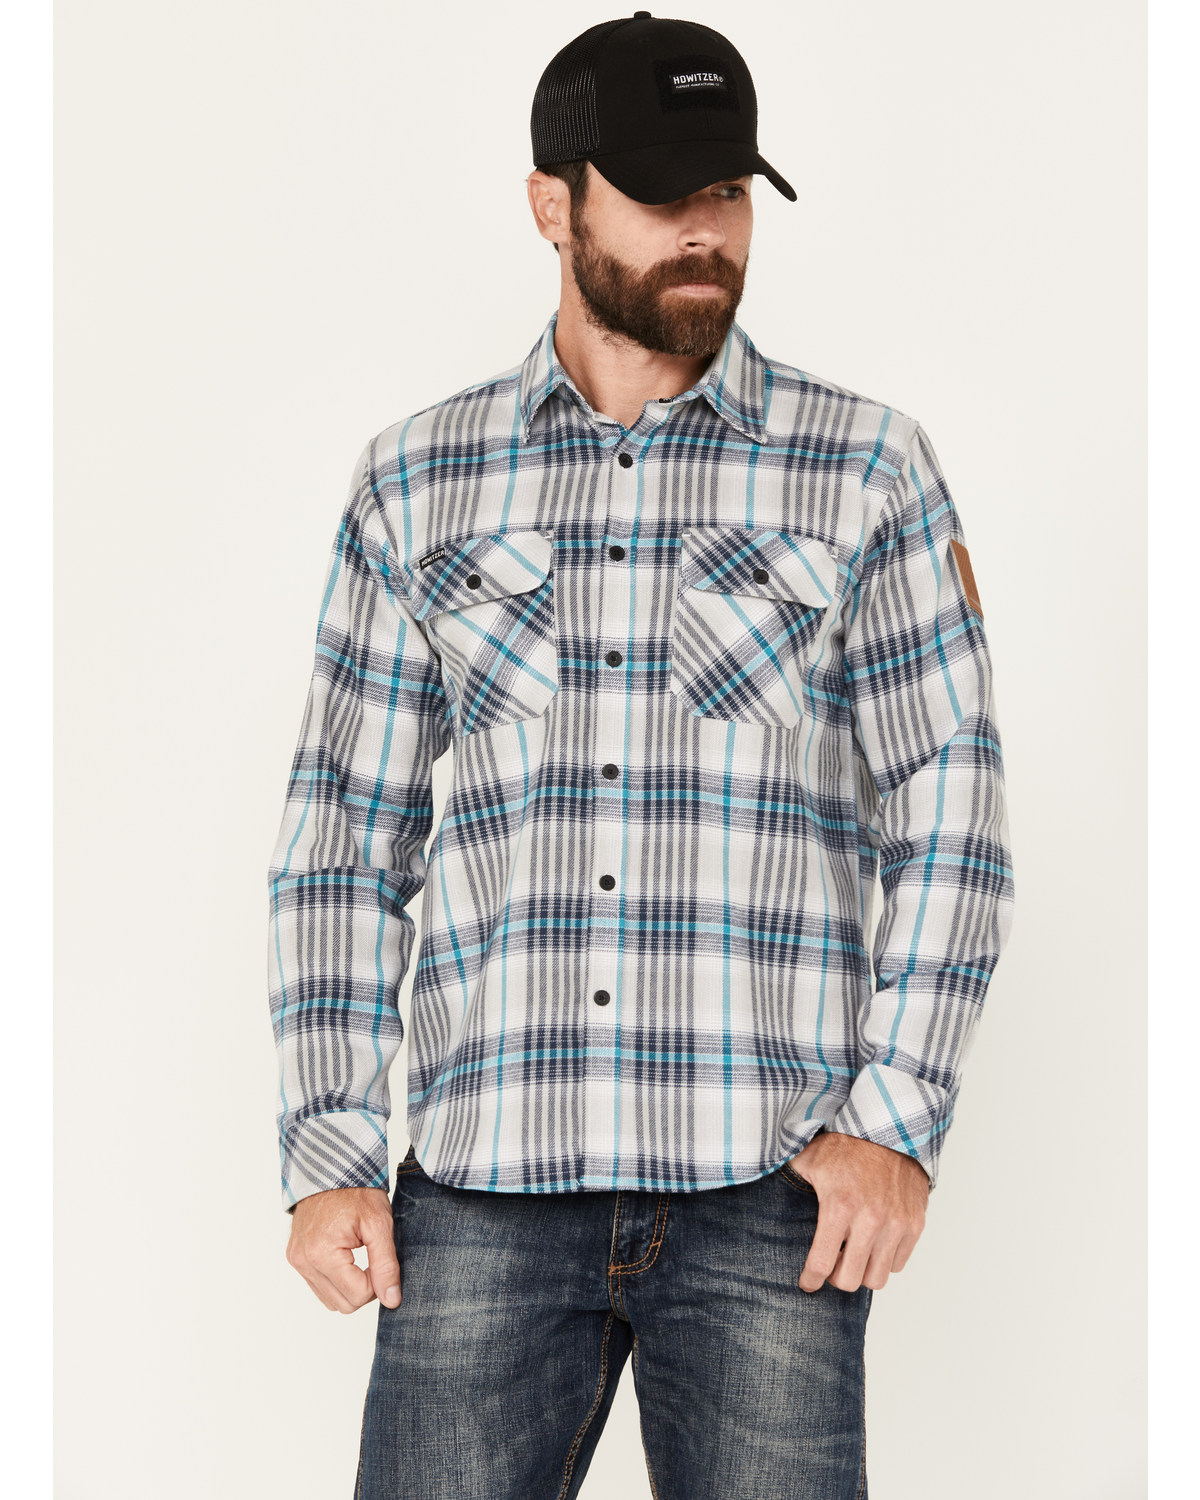 Howitzer Men's Peacemakers Plaid Print Long Sleeve Button-Down Flannel